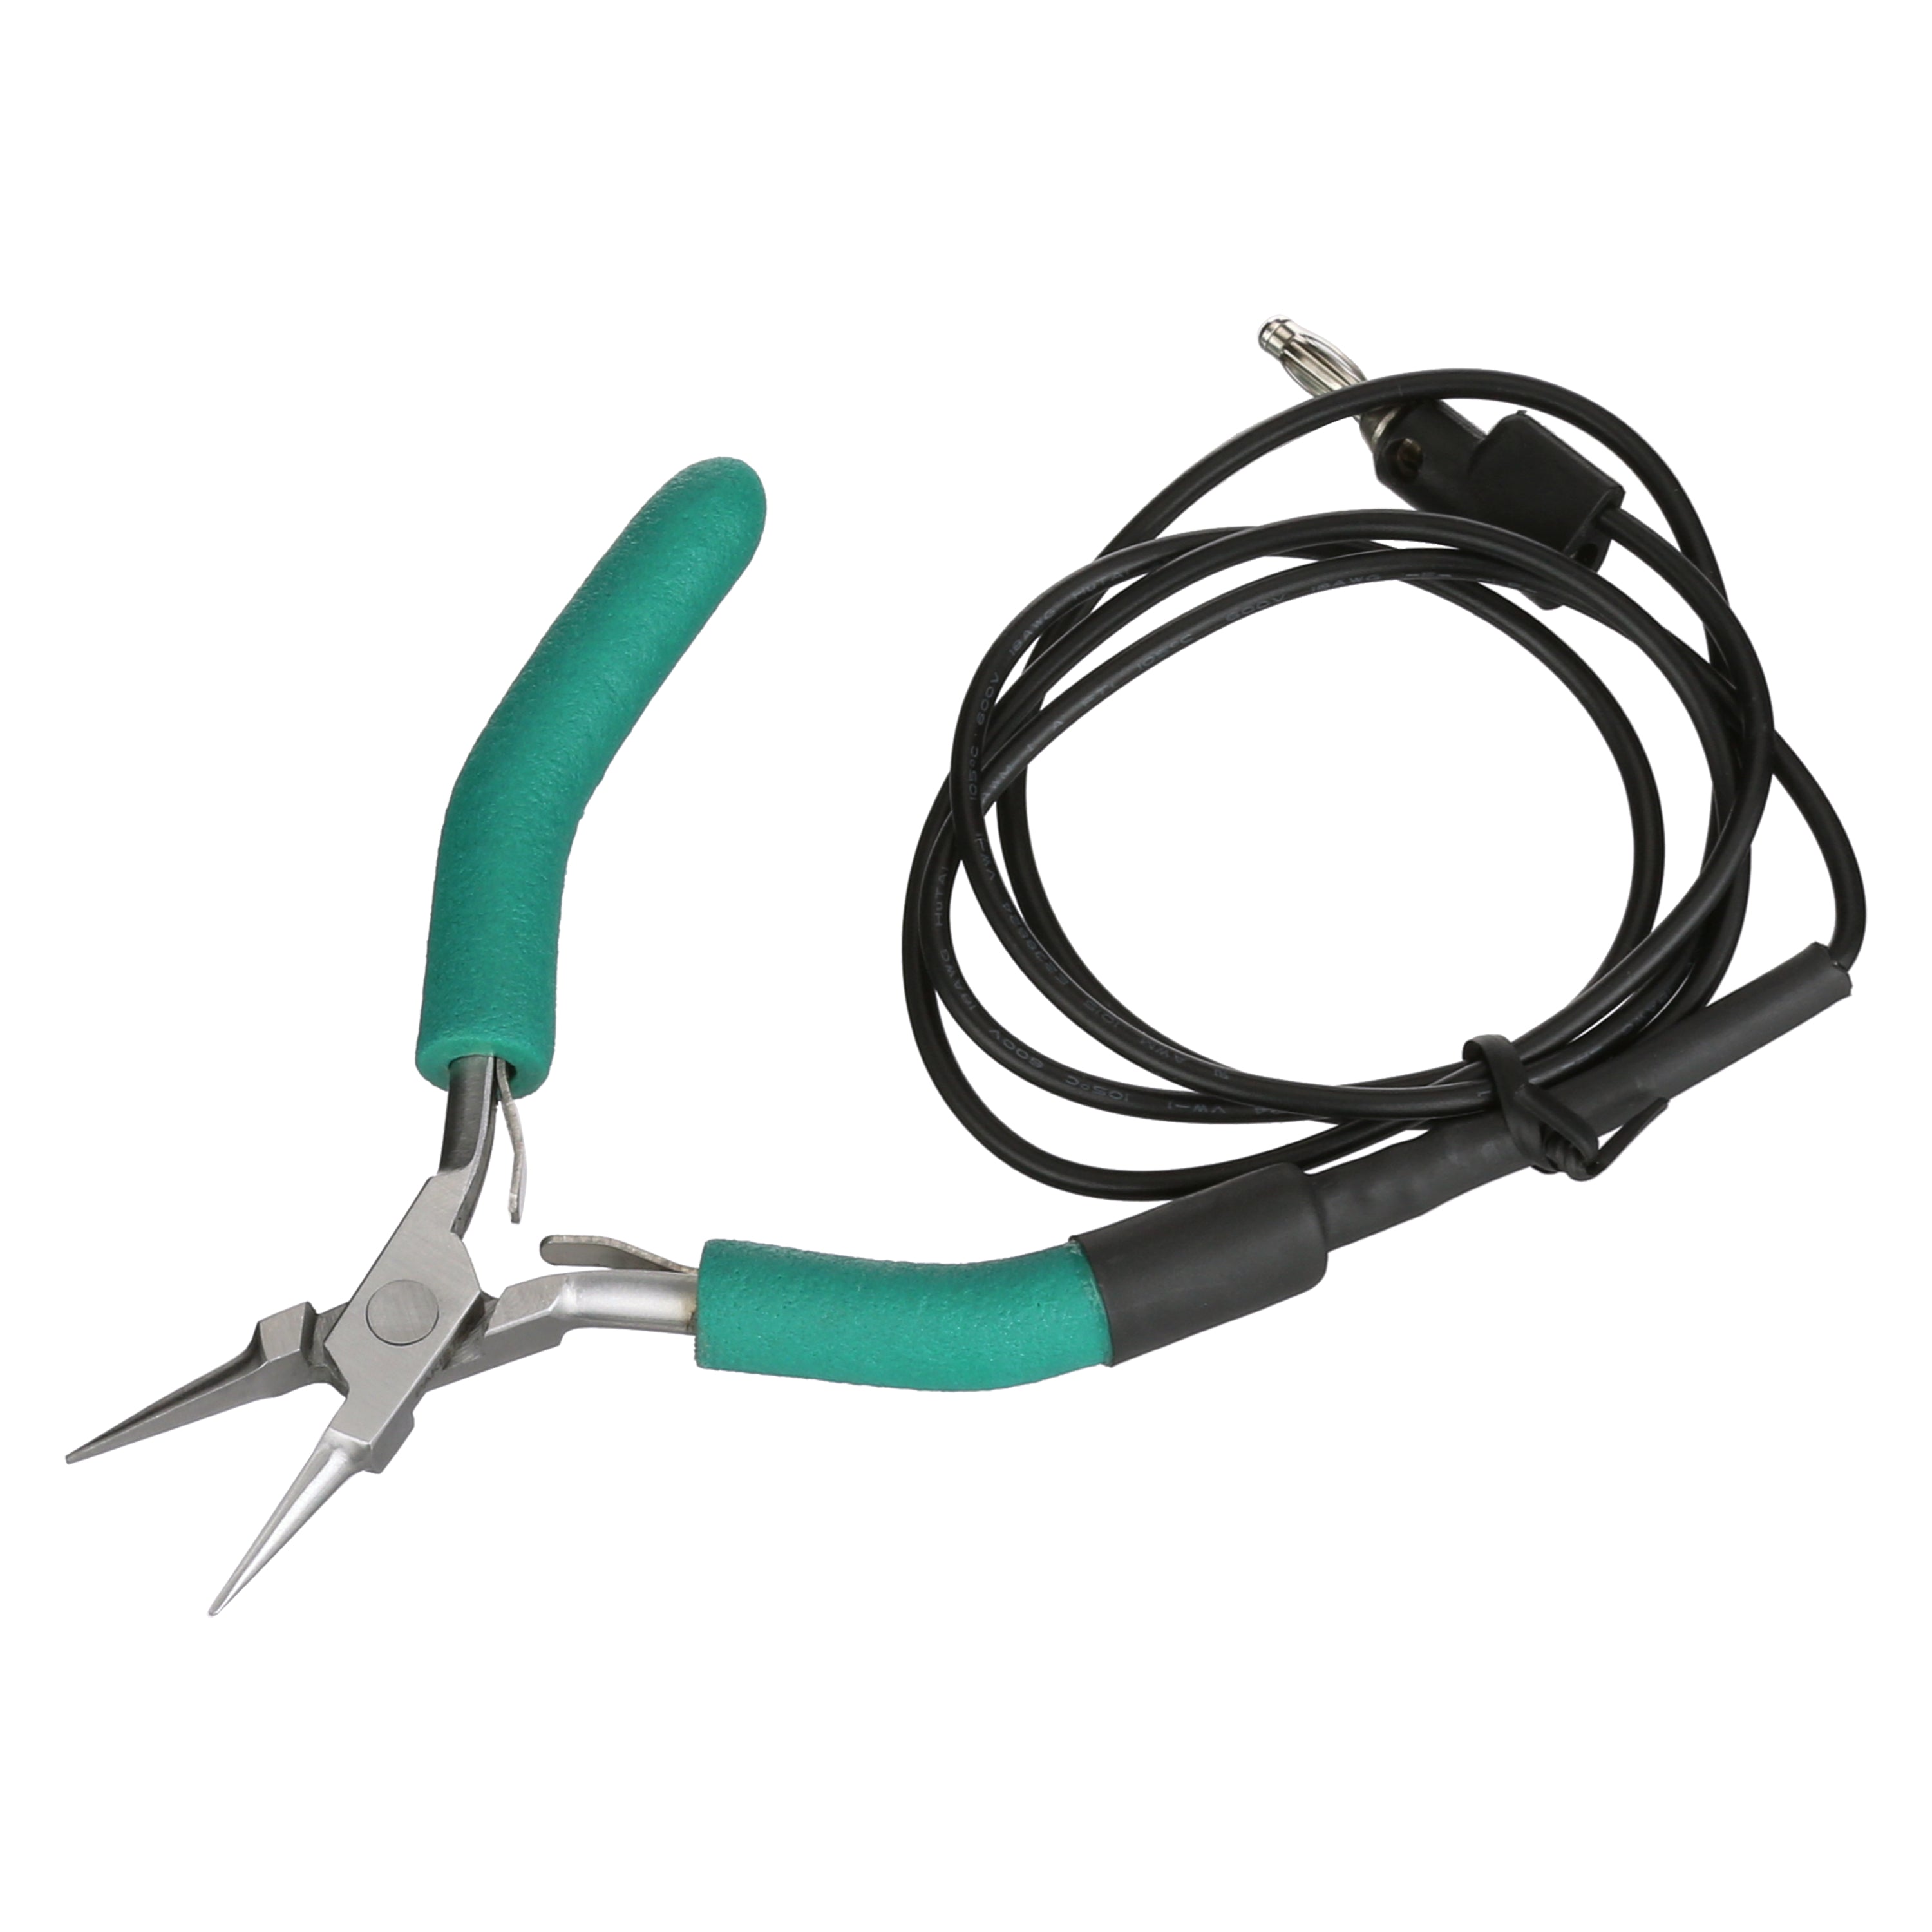 10 Types of Pliers & Their Uses in Workshop; Free Info ITI